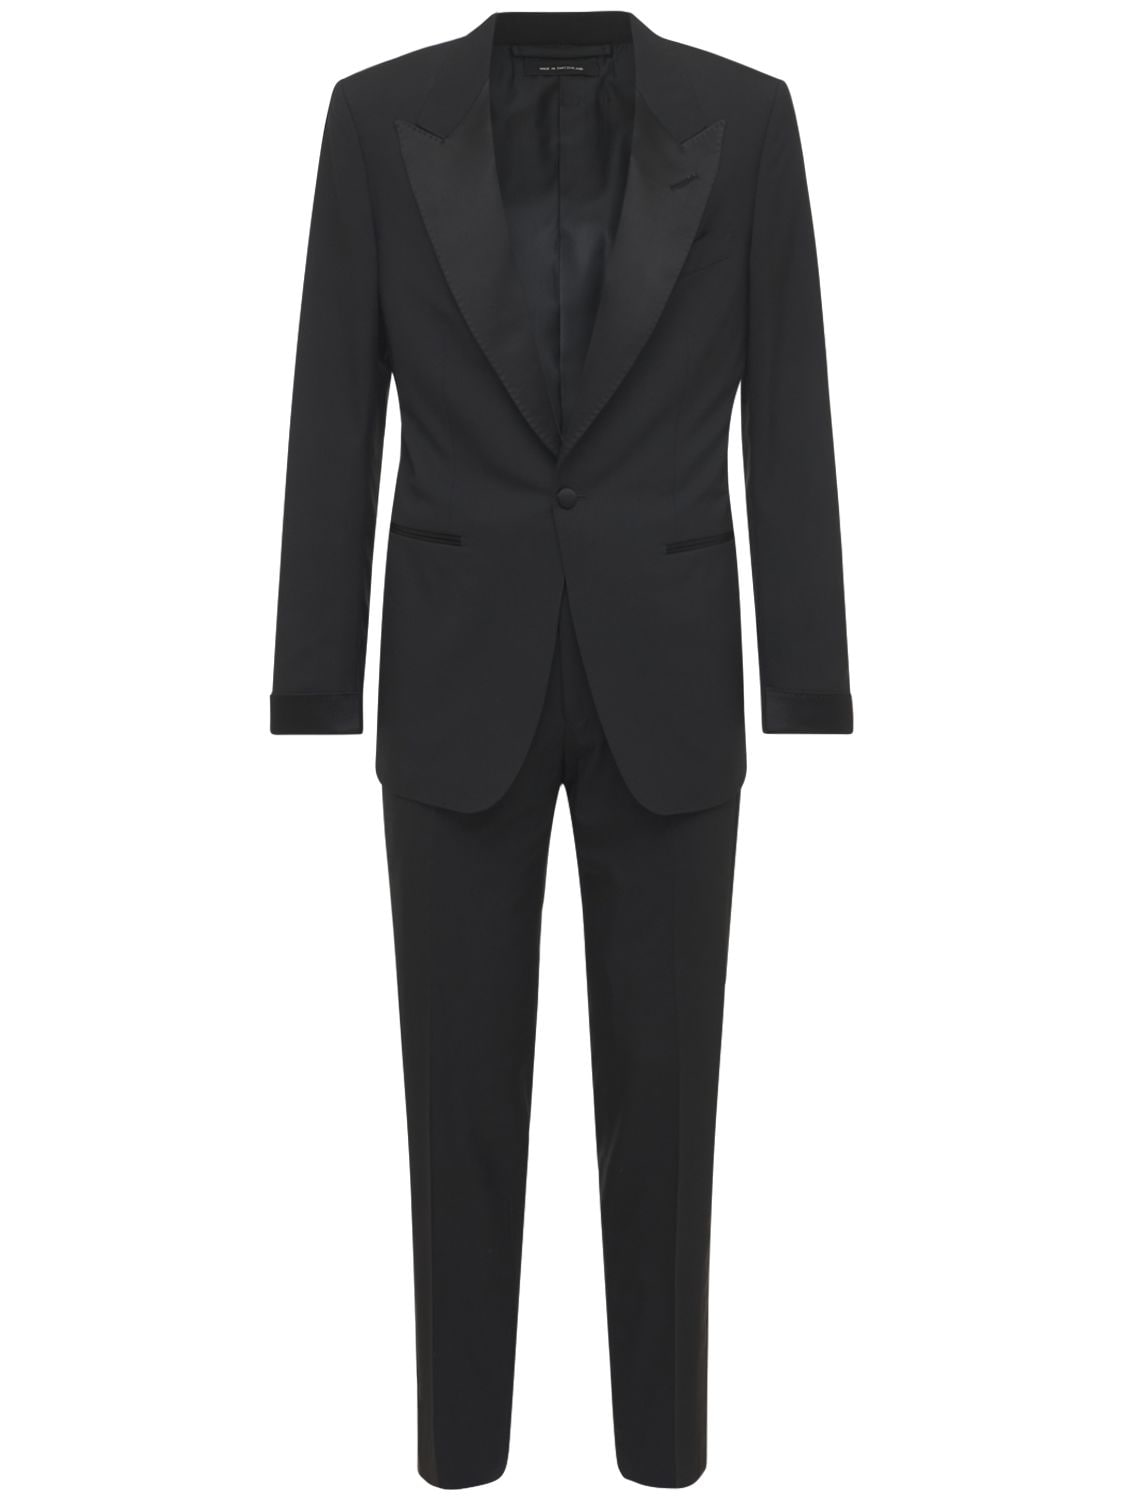 TOM FORD Plain Weave Wool Evening Suit for Men